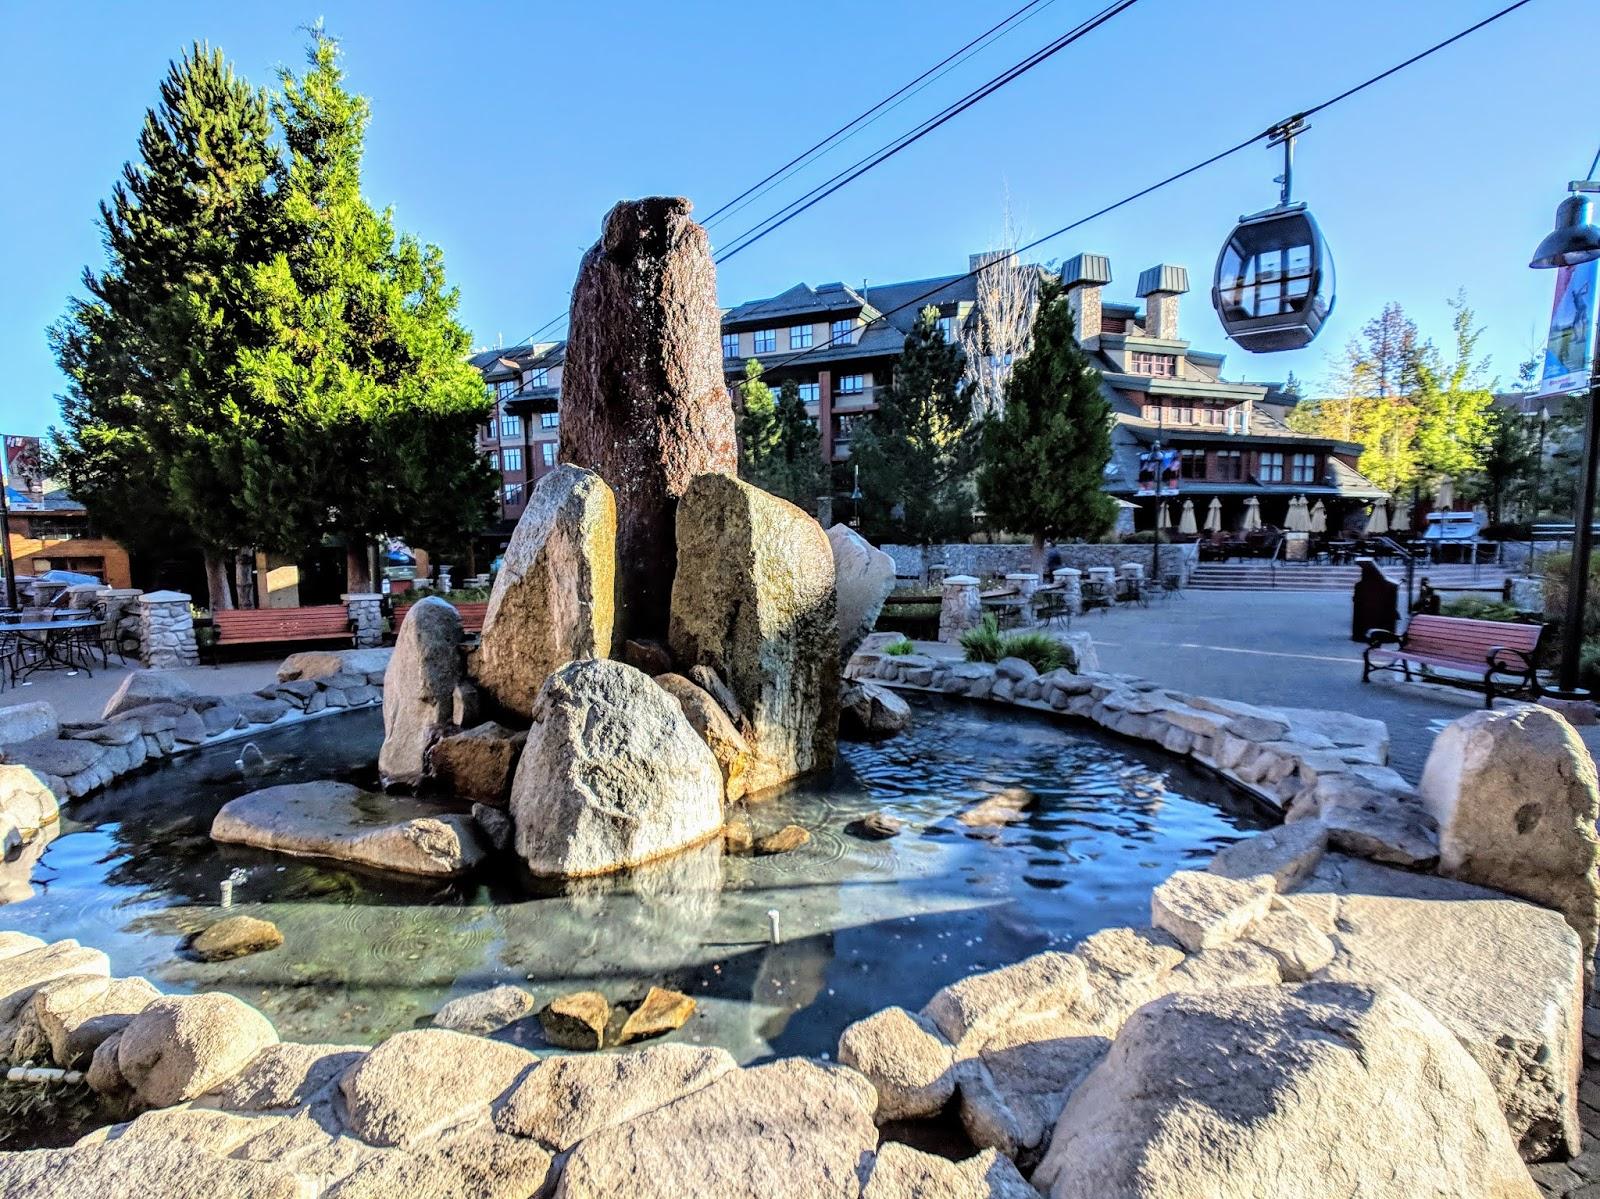 Summer Family Fun At Epic Discovery Heavenly Resort In Lake Tahoe